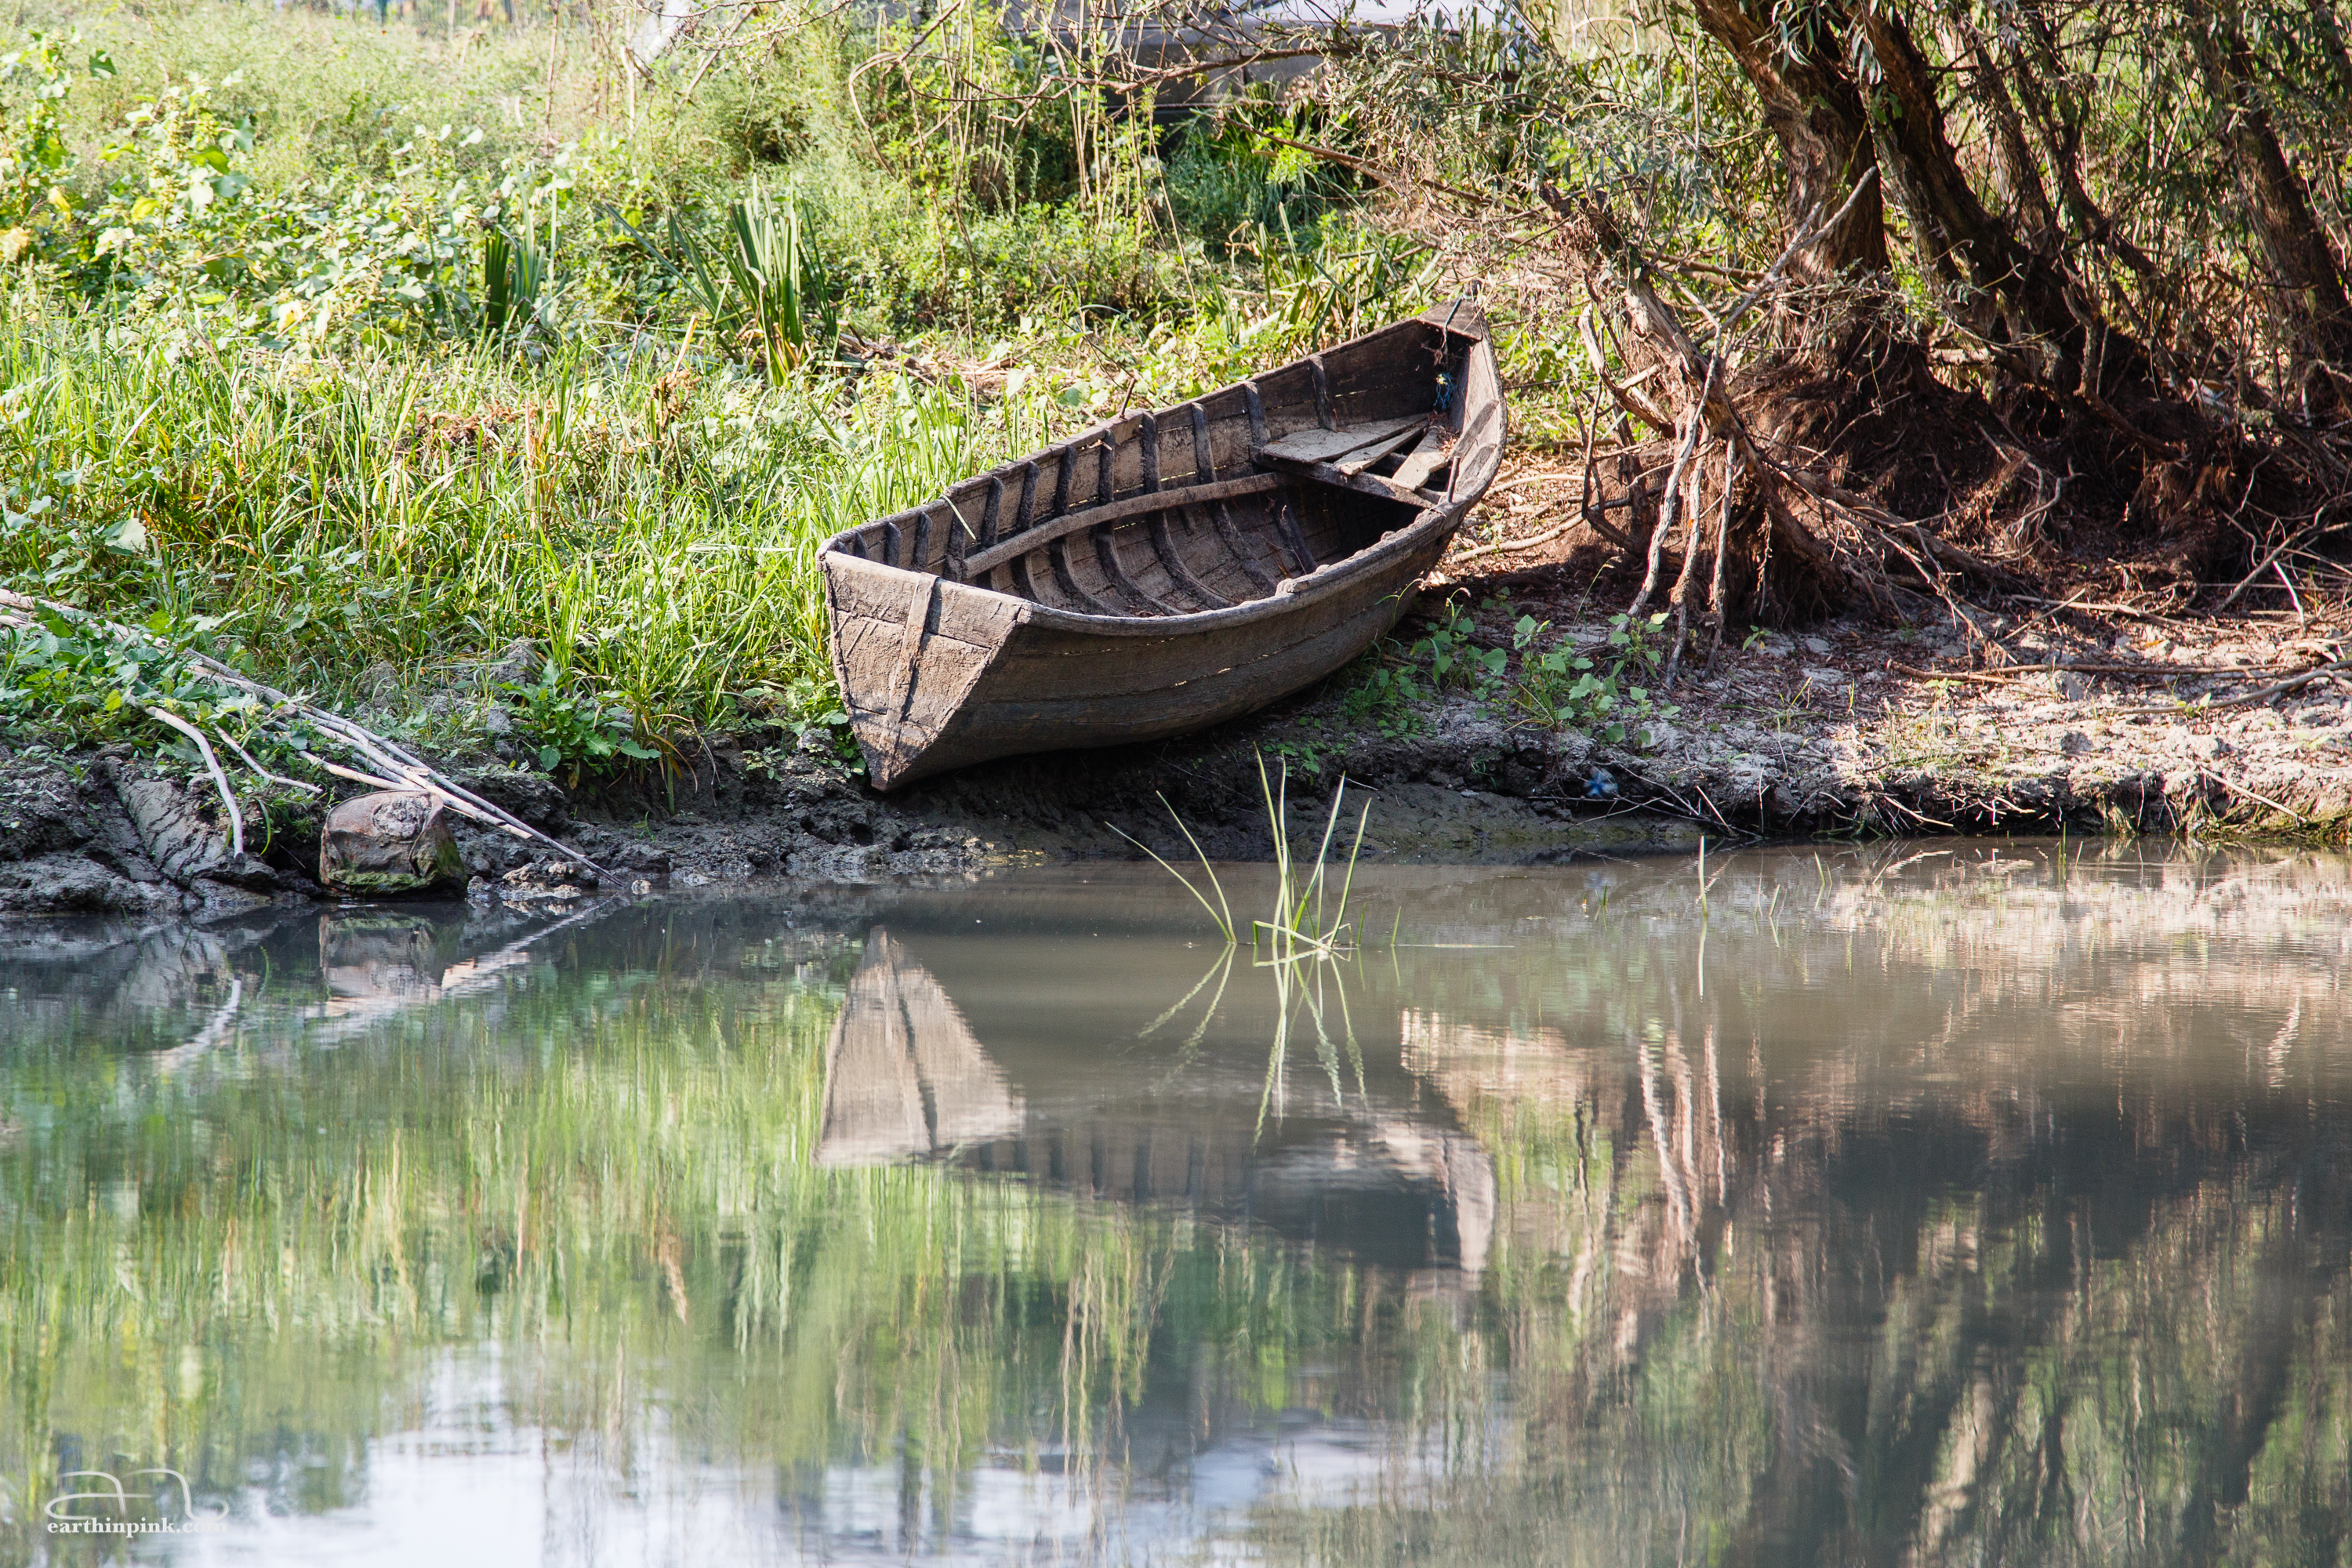 A small wooden boat by the side of a canal is reflected on the surface of the water